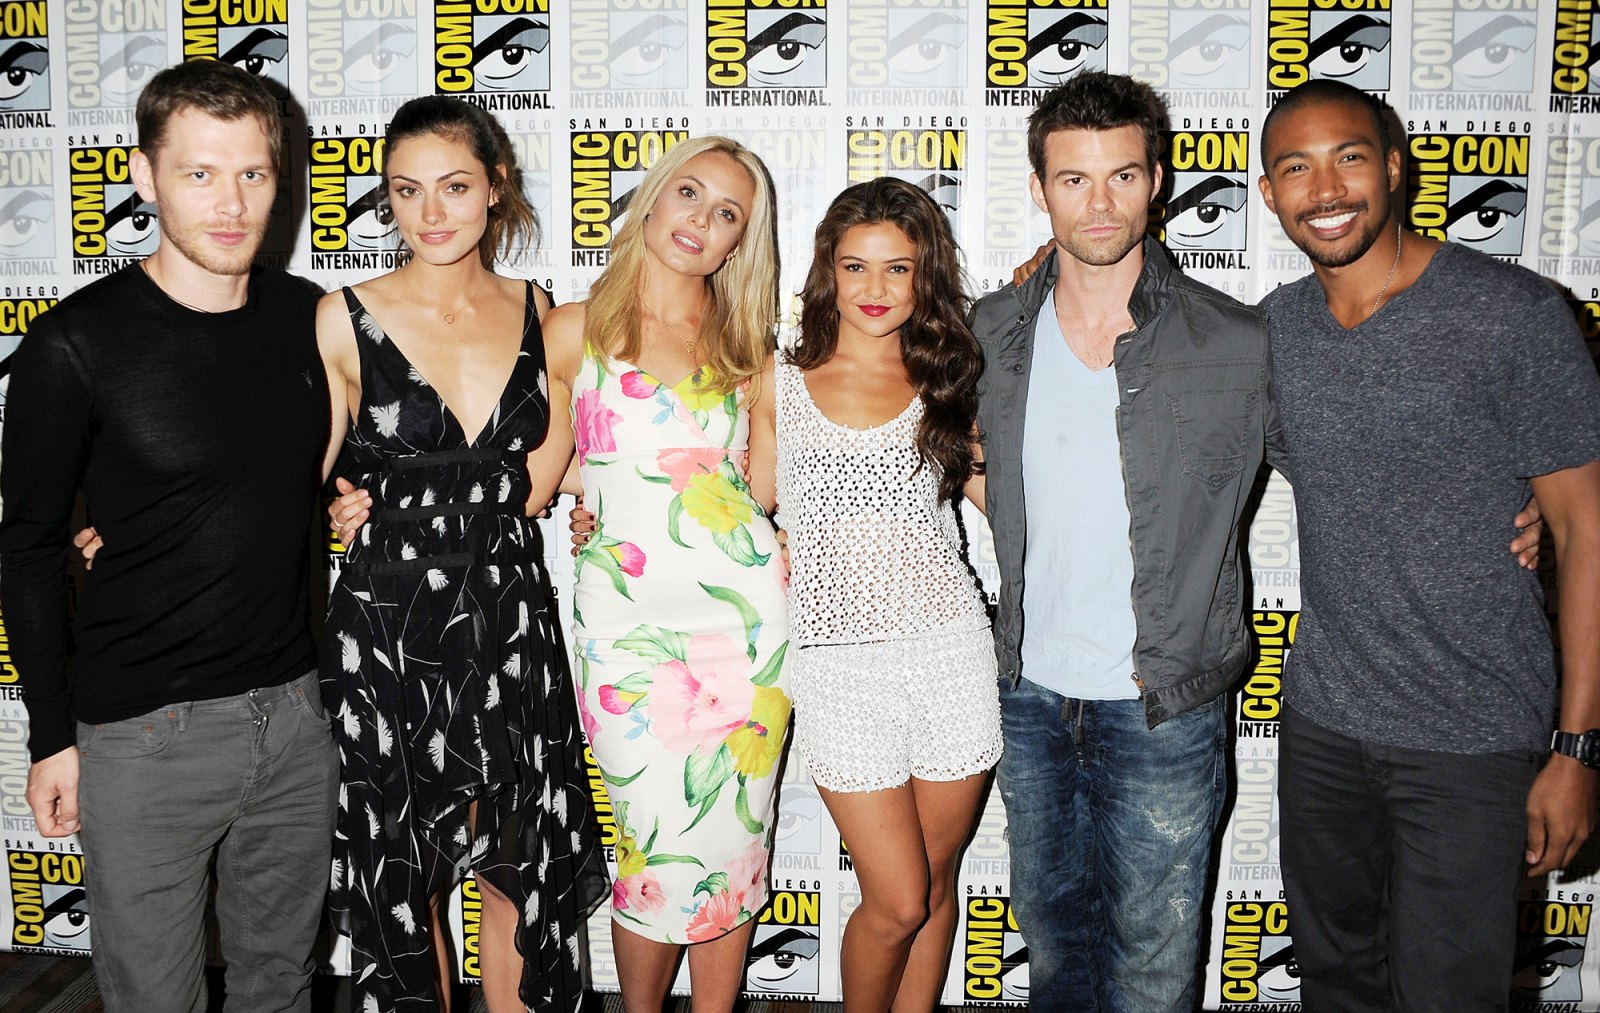 Joseph Morgan Phoebe Tonkin Claire Holt Danielle Campbell and Daniel Gillies at The Originals Photocall The Originals Cast Where Are They Now